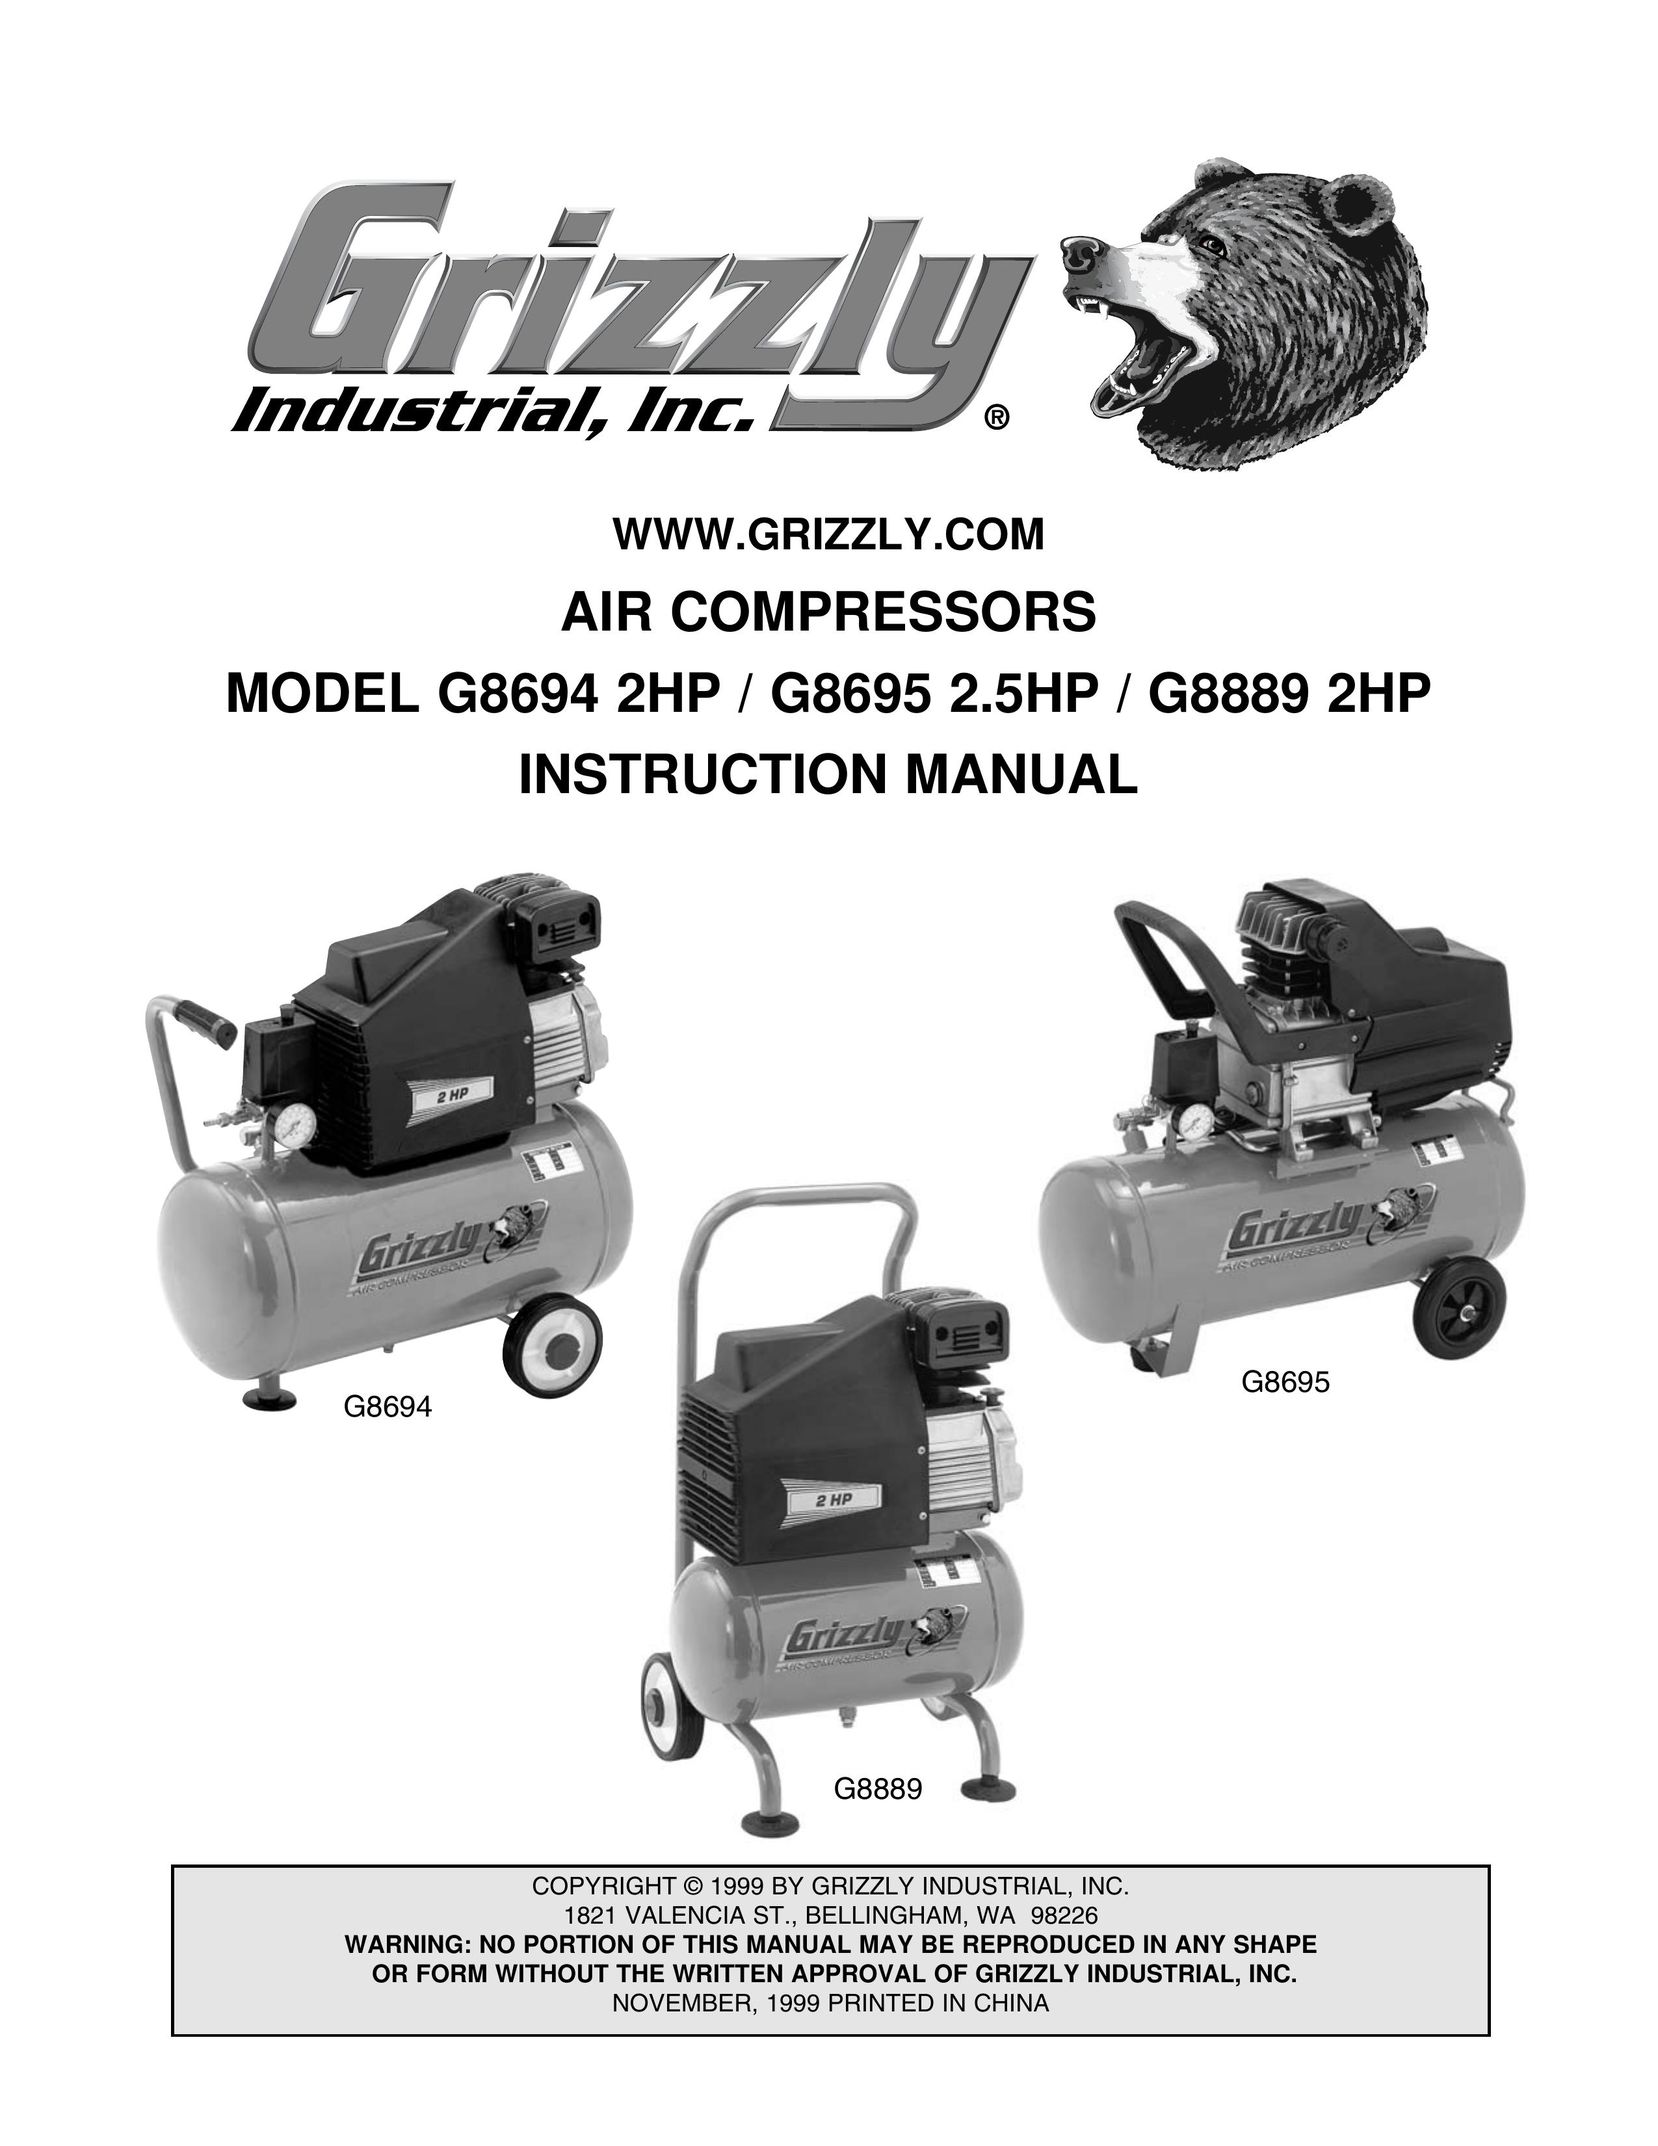 Grizzly G8694 Air Compressor User Manual